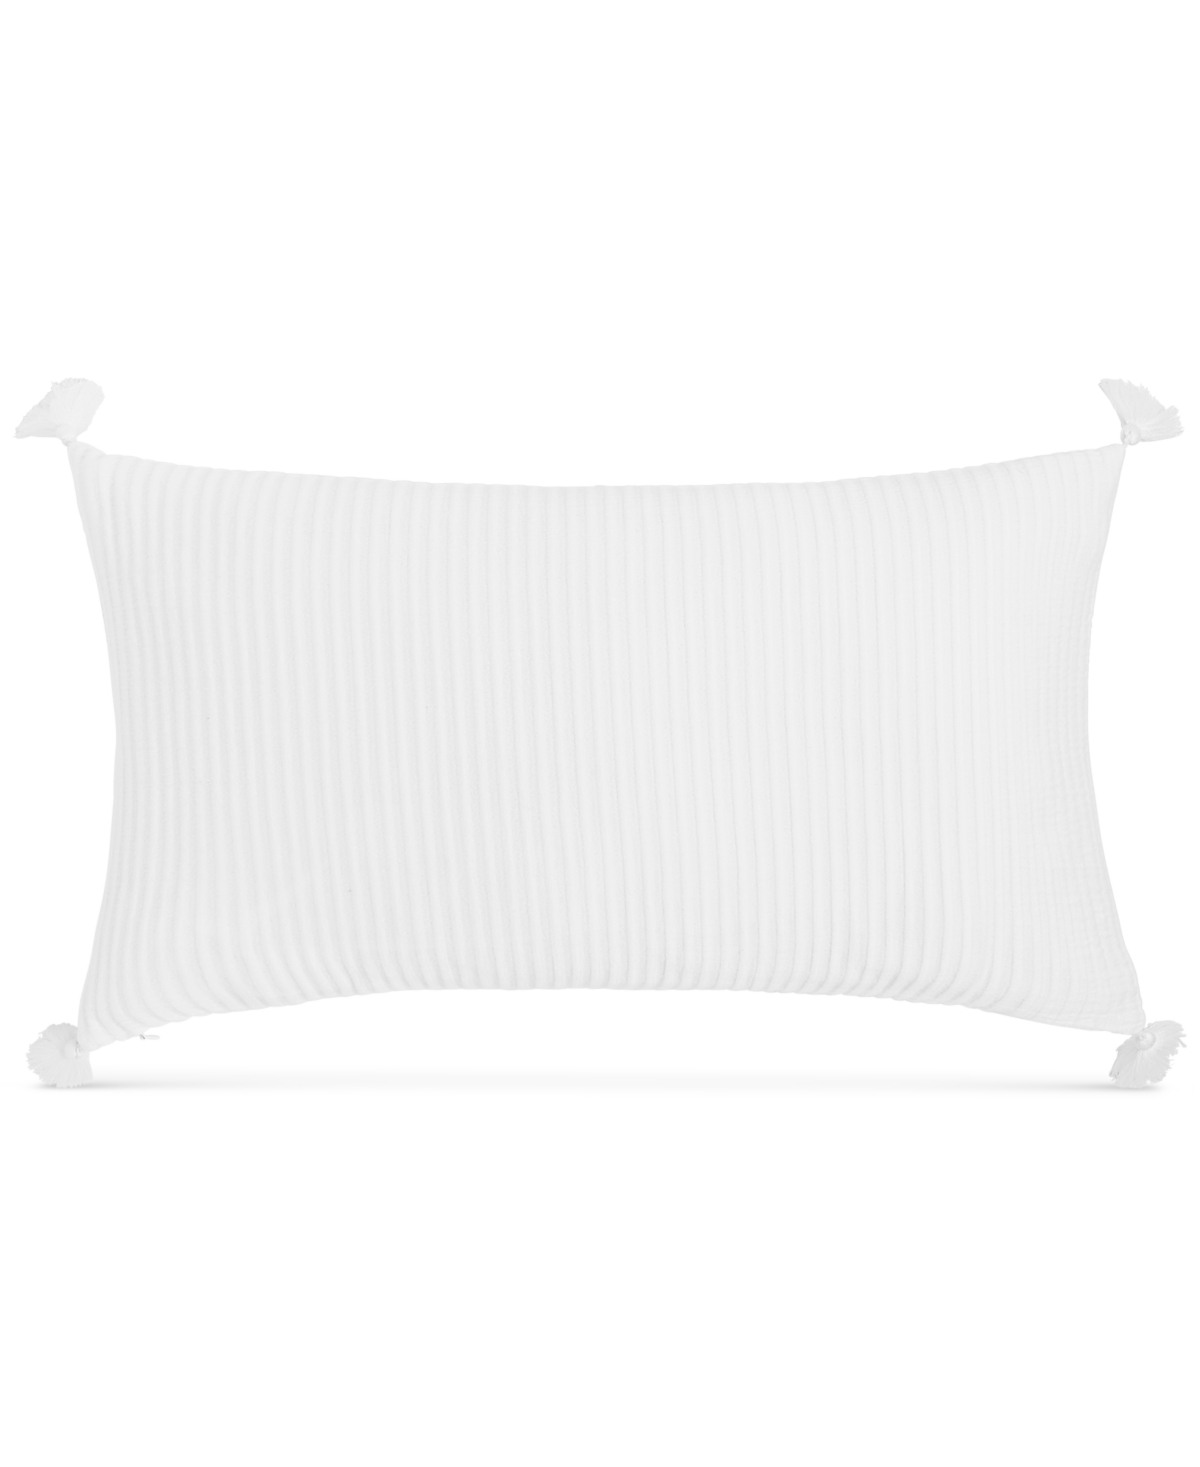 Charter Club Woven Rib Decorative Pillow, 14" x 24", Created for Macy's Bedding